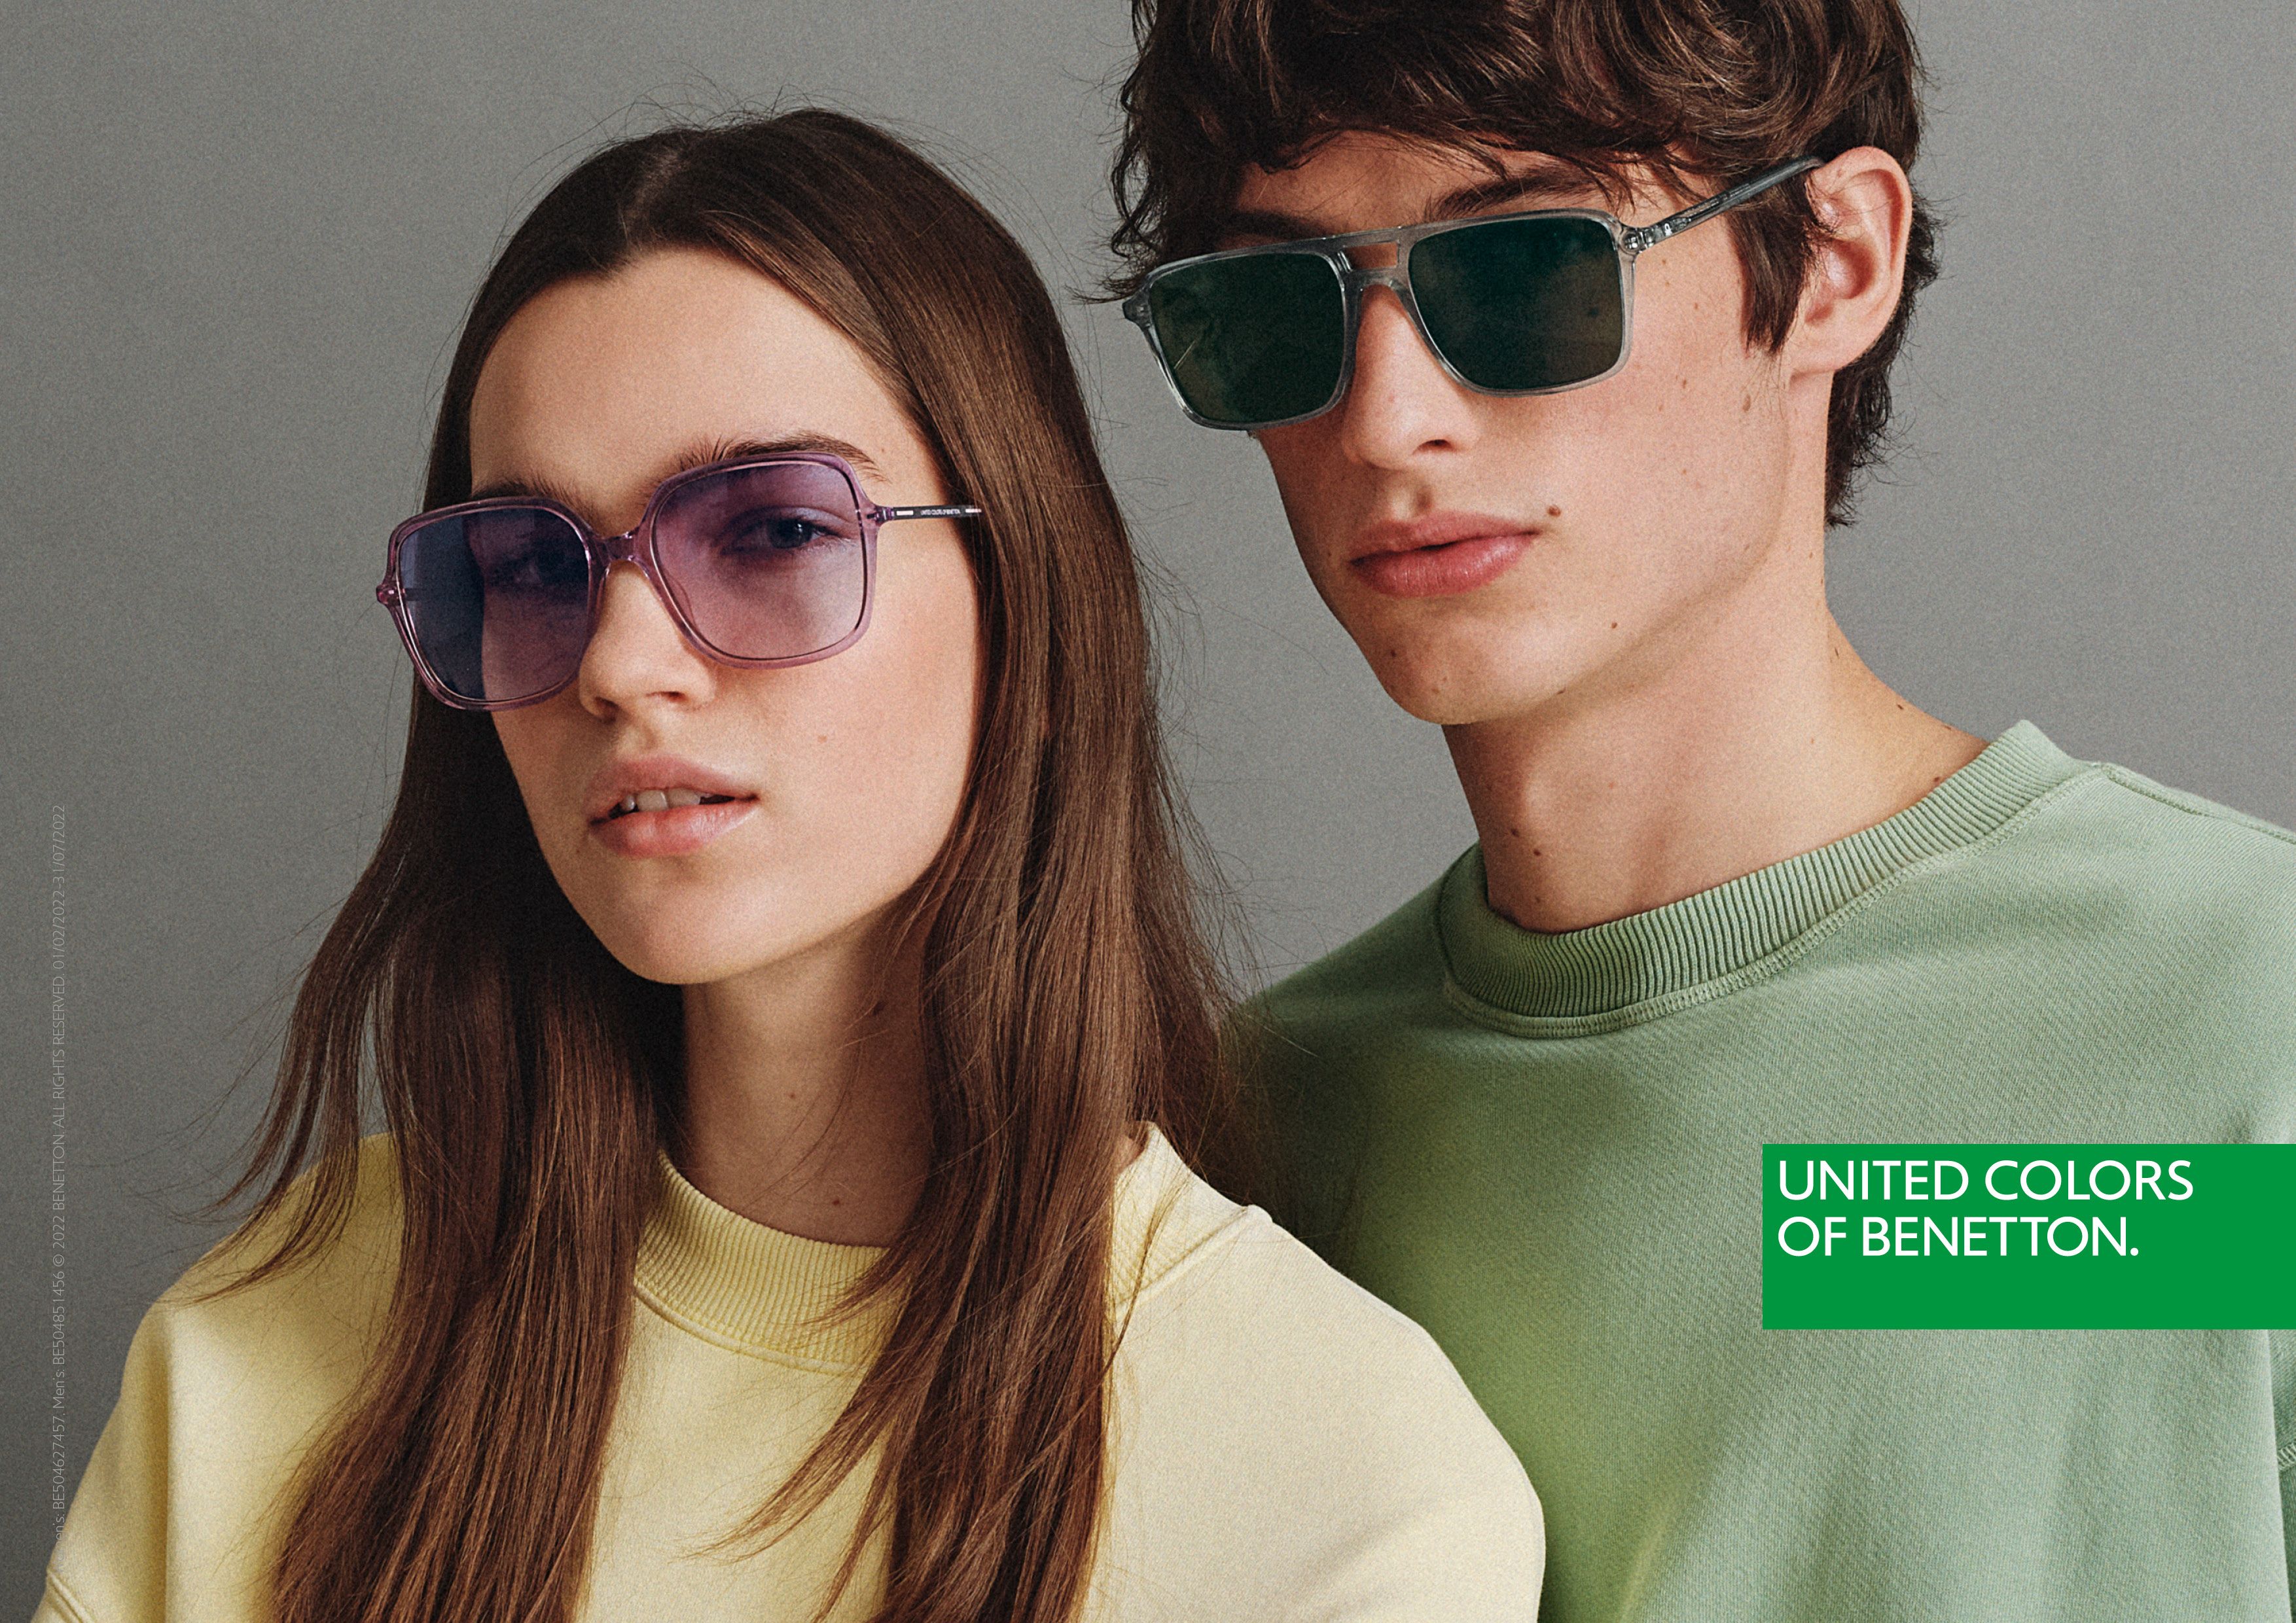 United Colors of Benetton SUN22 collection